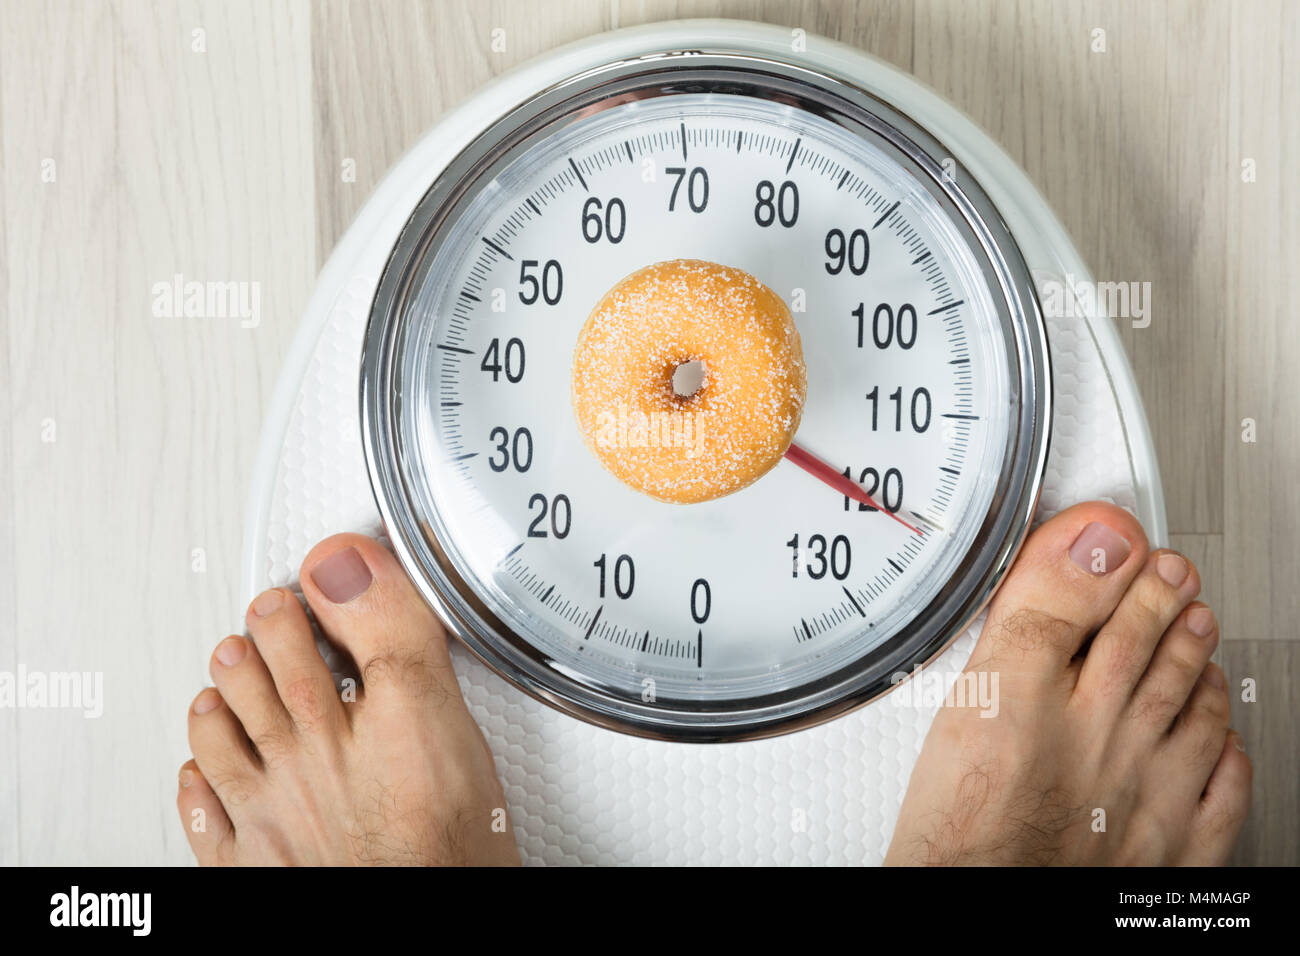 Close-up Of A Person Measuring Weight With Donut On Weighing Scale Stock Photo